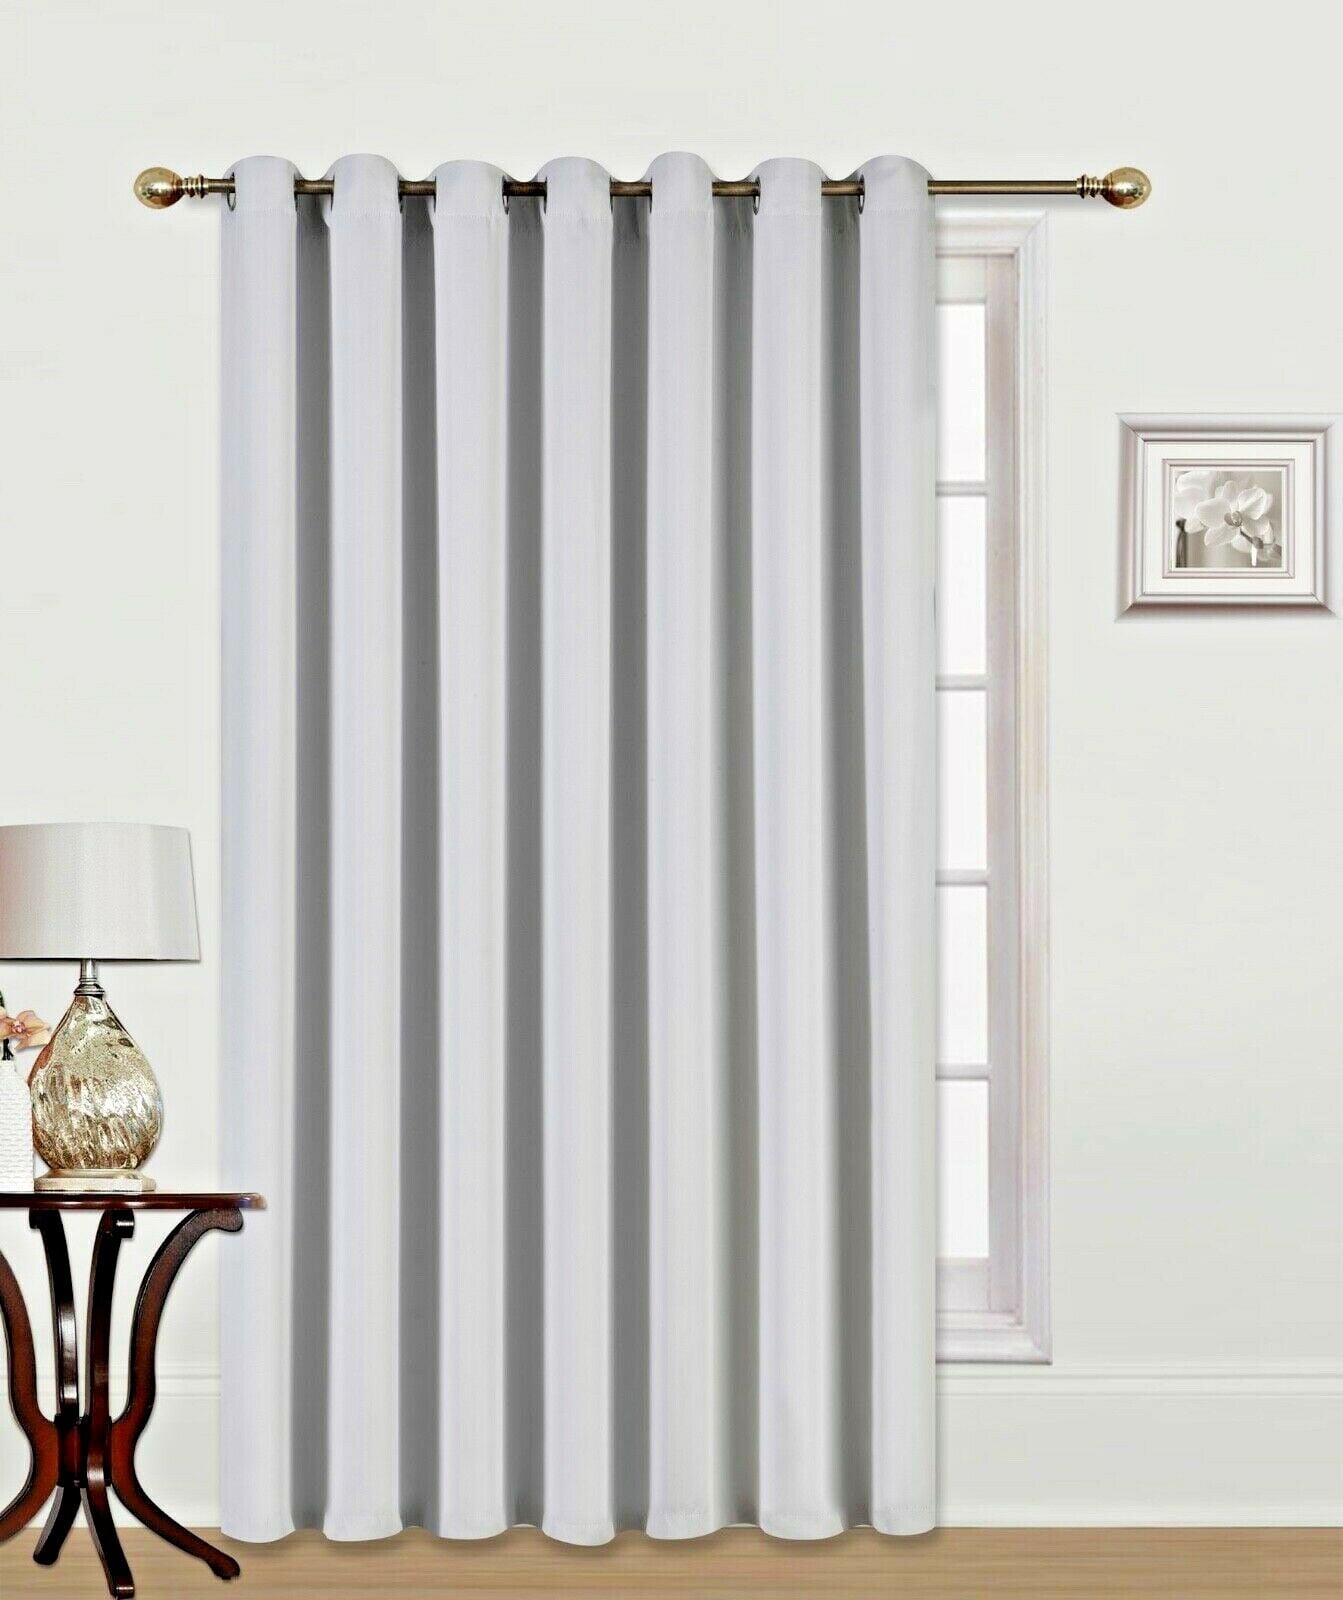 K100 Thermal White Blackout Panel 1pc, What Size Curtains For Patio Doors